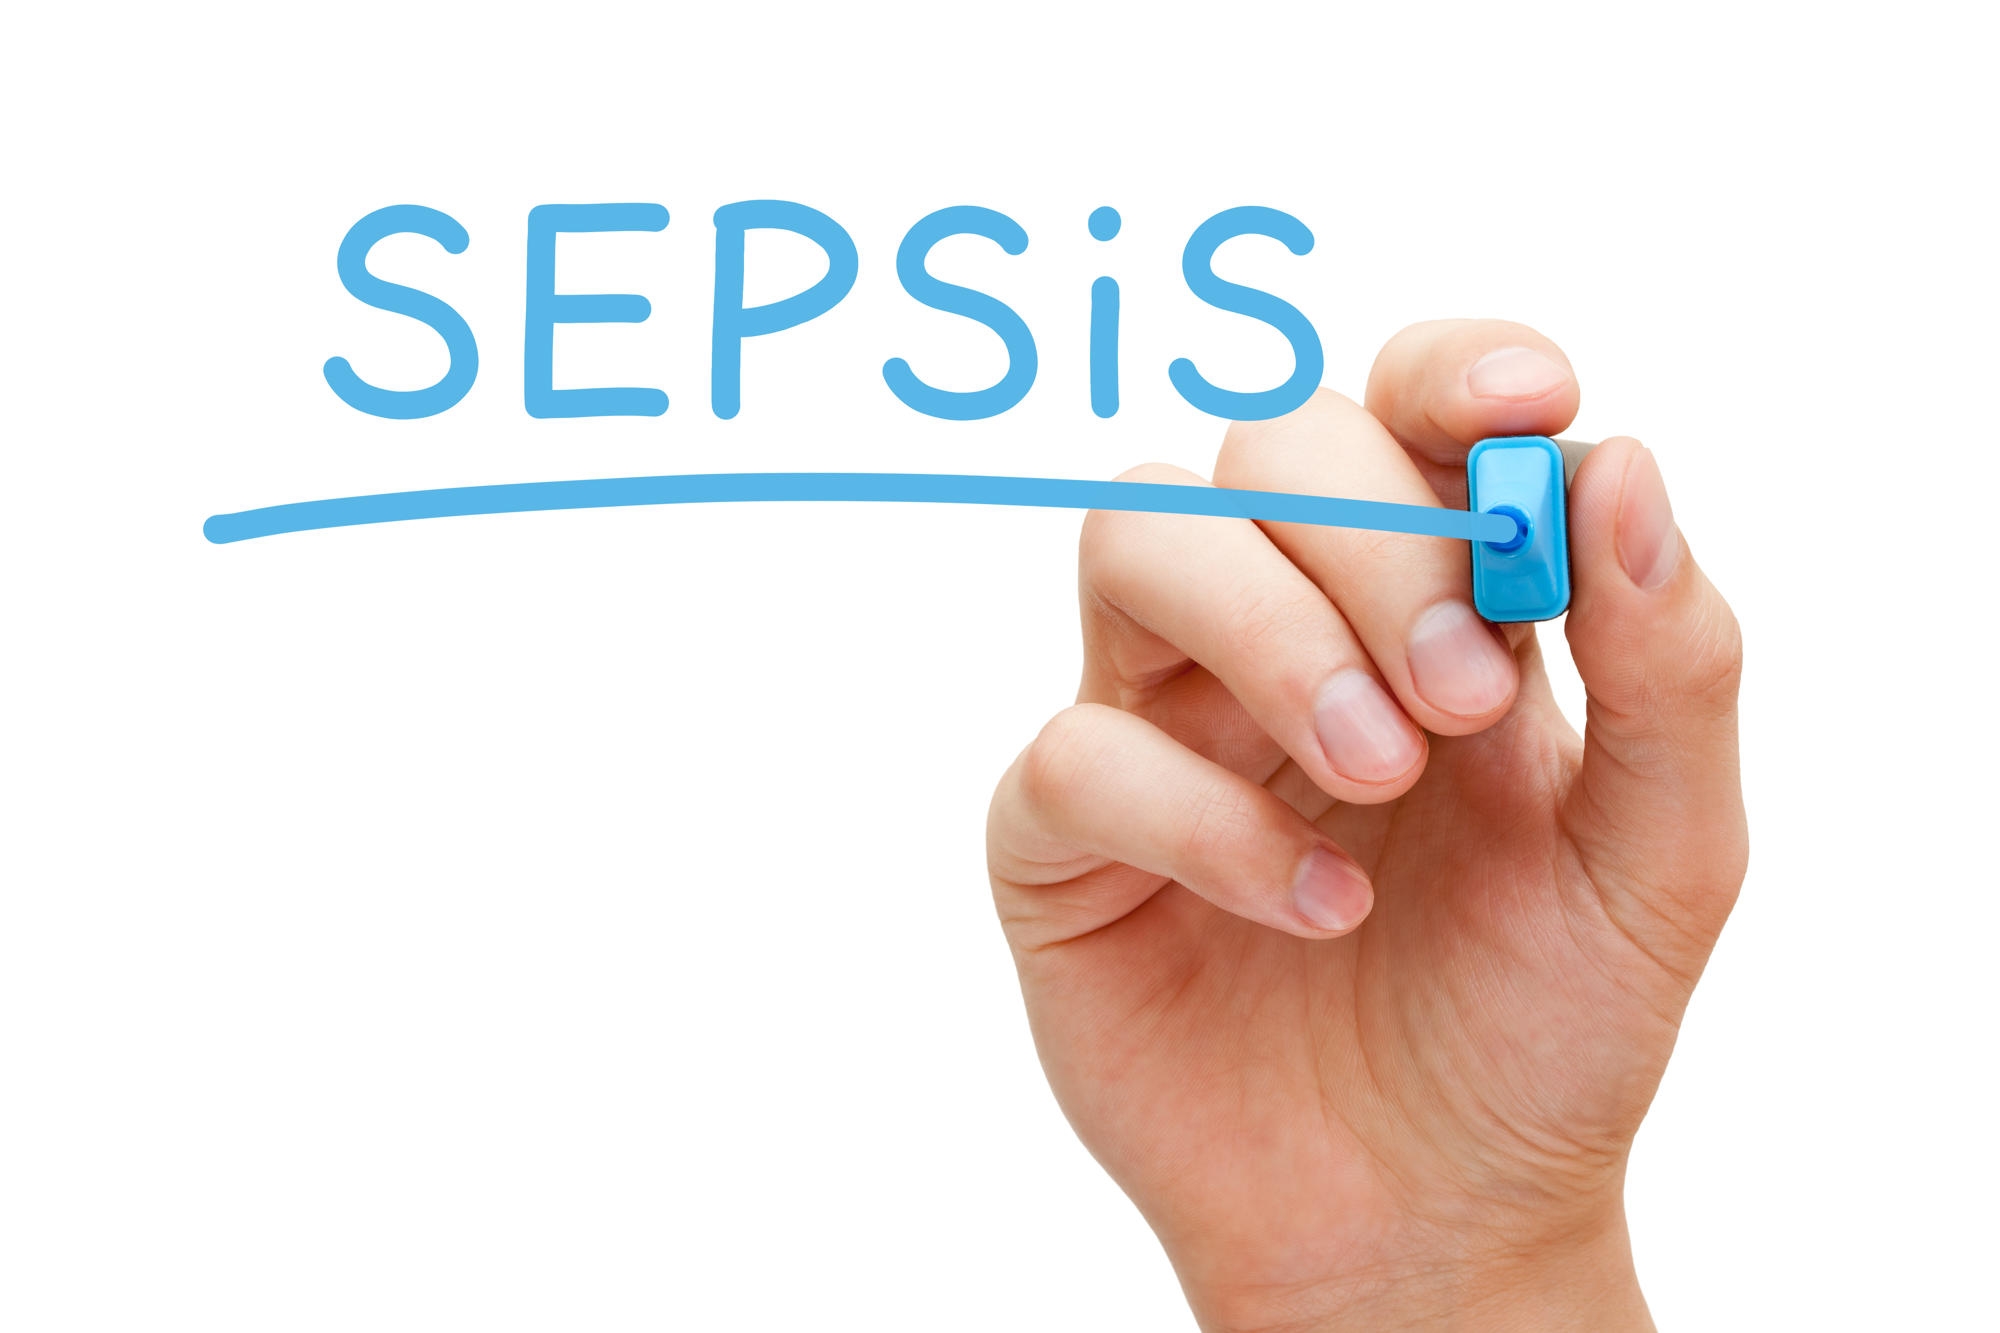 Blood clotting research holds hope for sepsis